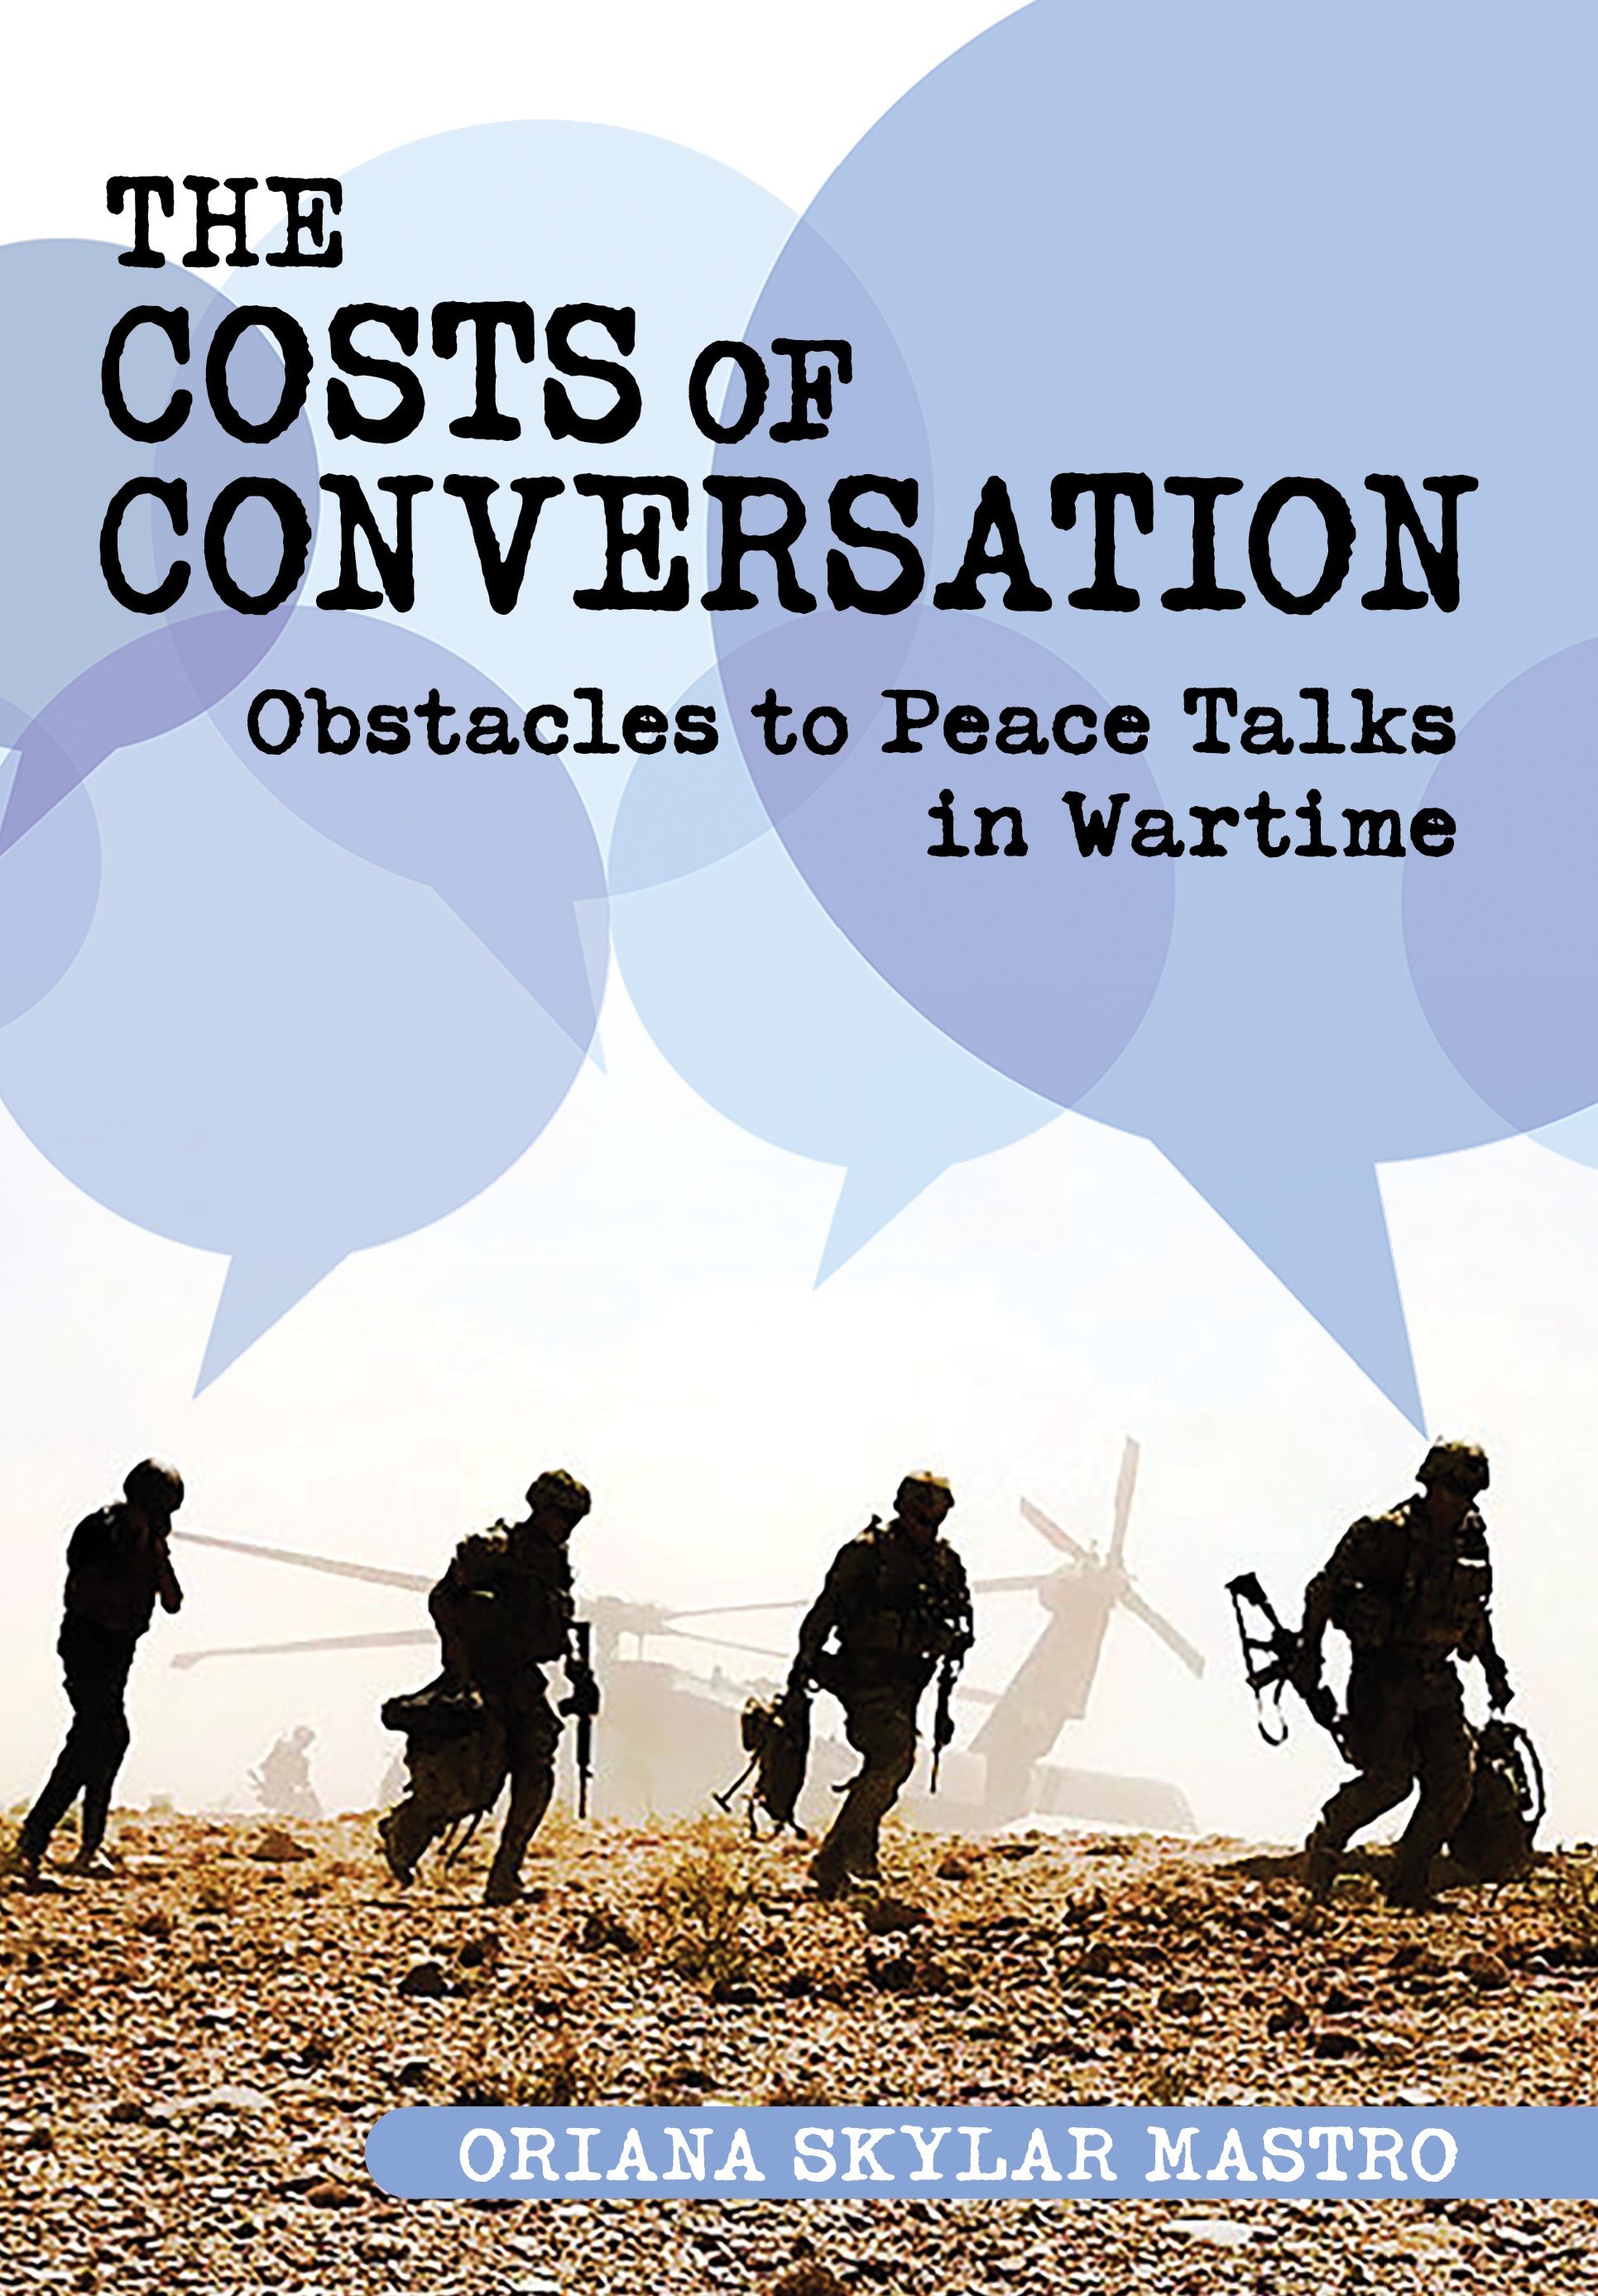 The cover for the book, "The Costs of Conversation: Obstacles to Peace Talks in Wartime" by Oriana Skylar Mastro